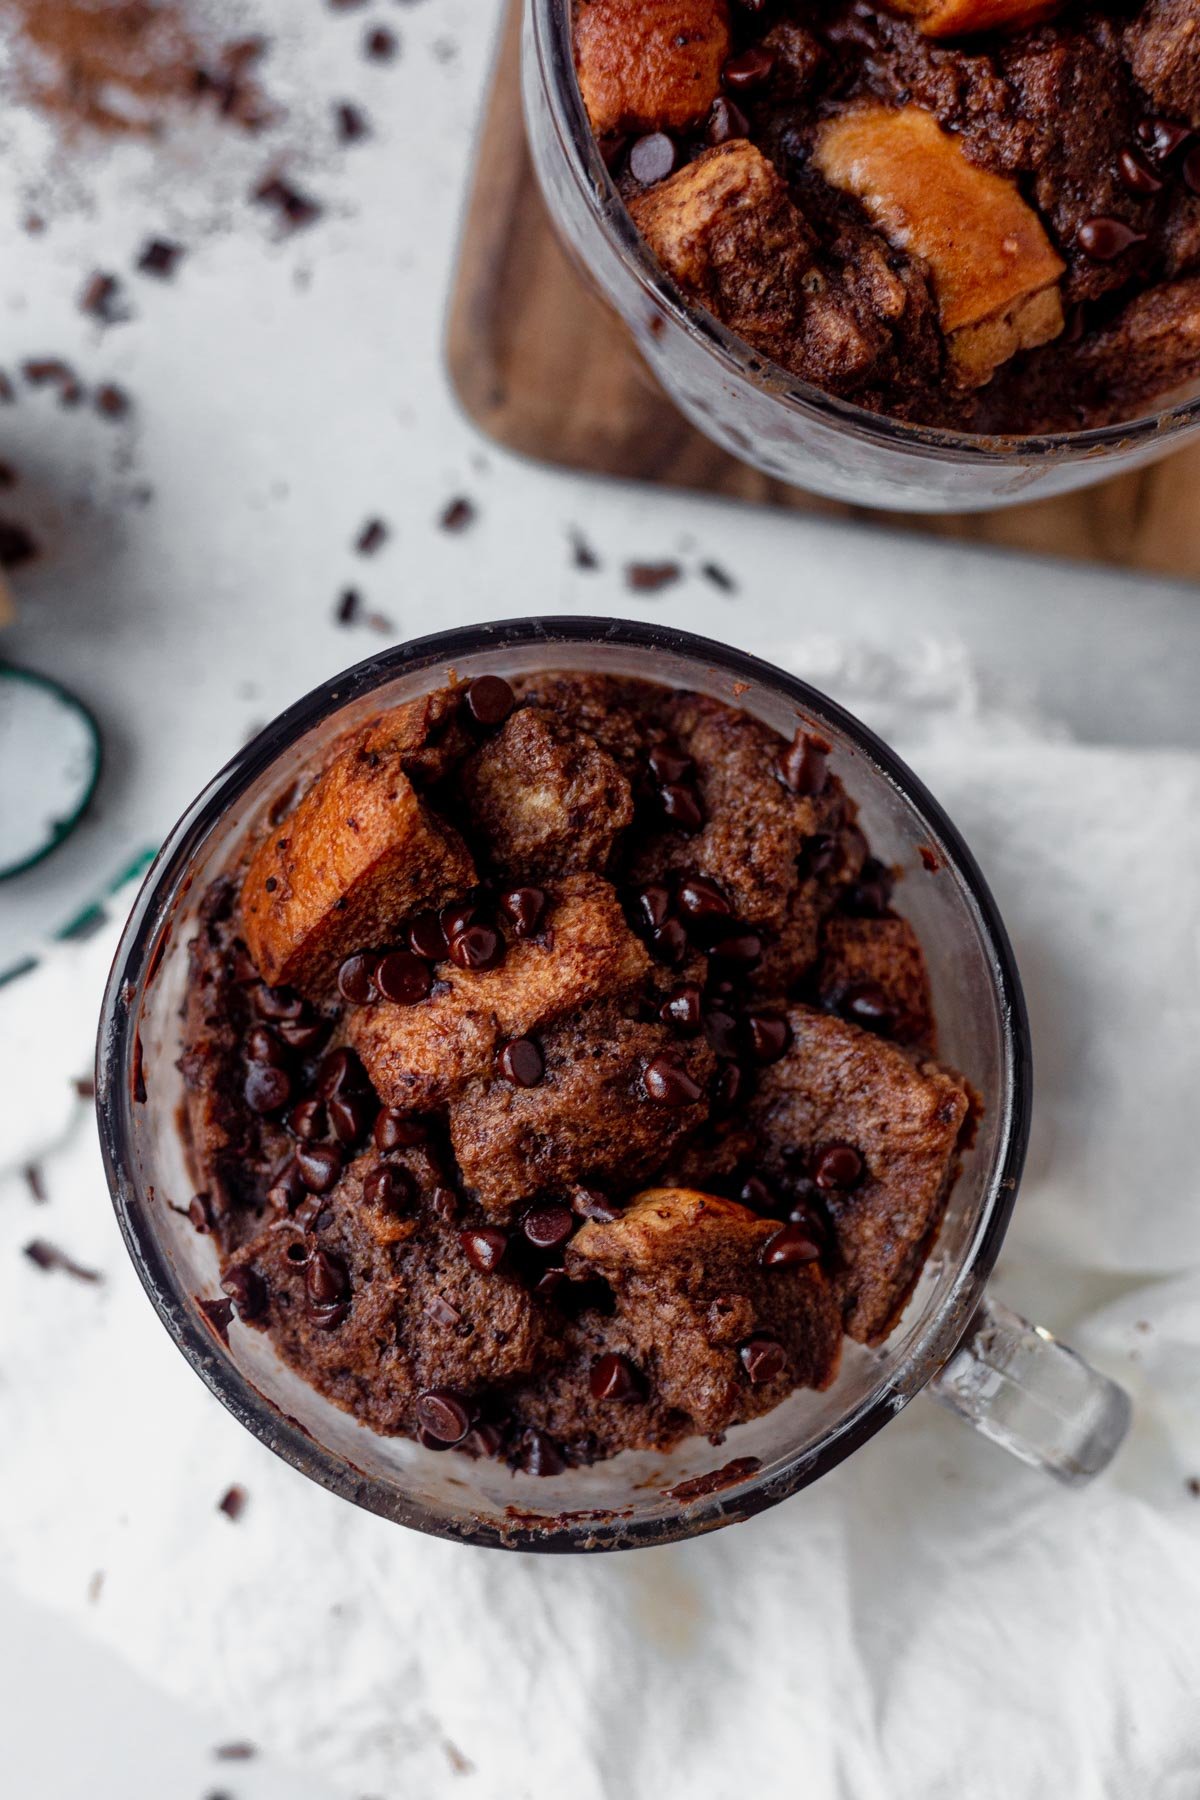 baked bread pudding in a glass mug with chocolate chips